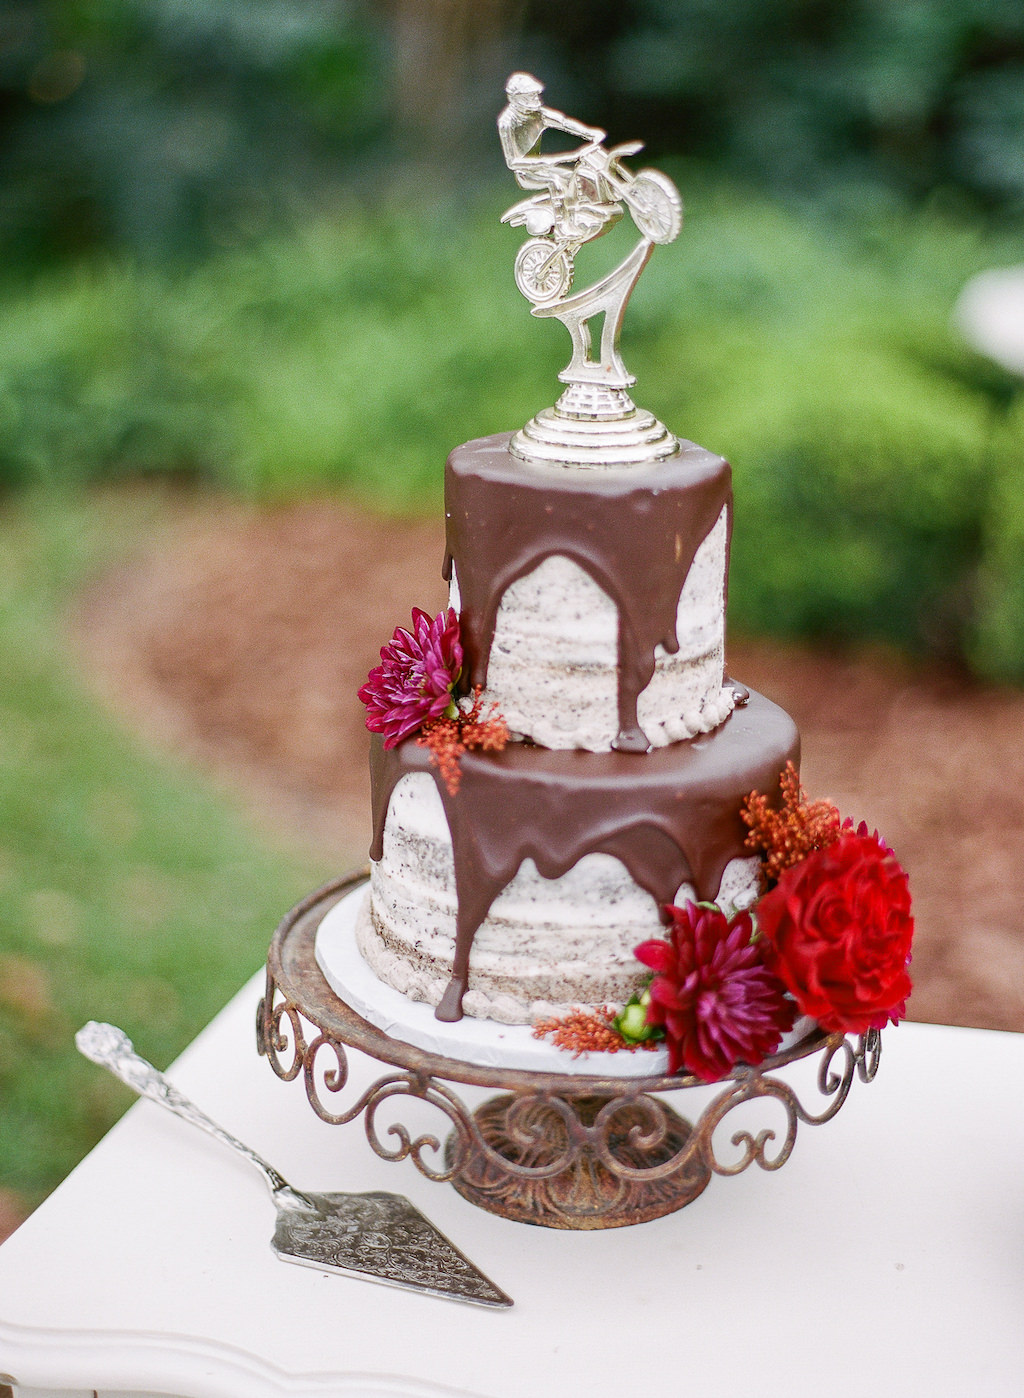 Two Tier Wedding Cake with Chocolate Drip, Real Red and Pink Flowers, Motorcyclist Cake Topper